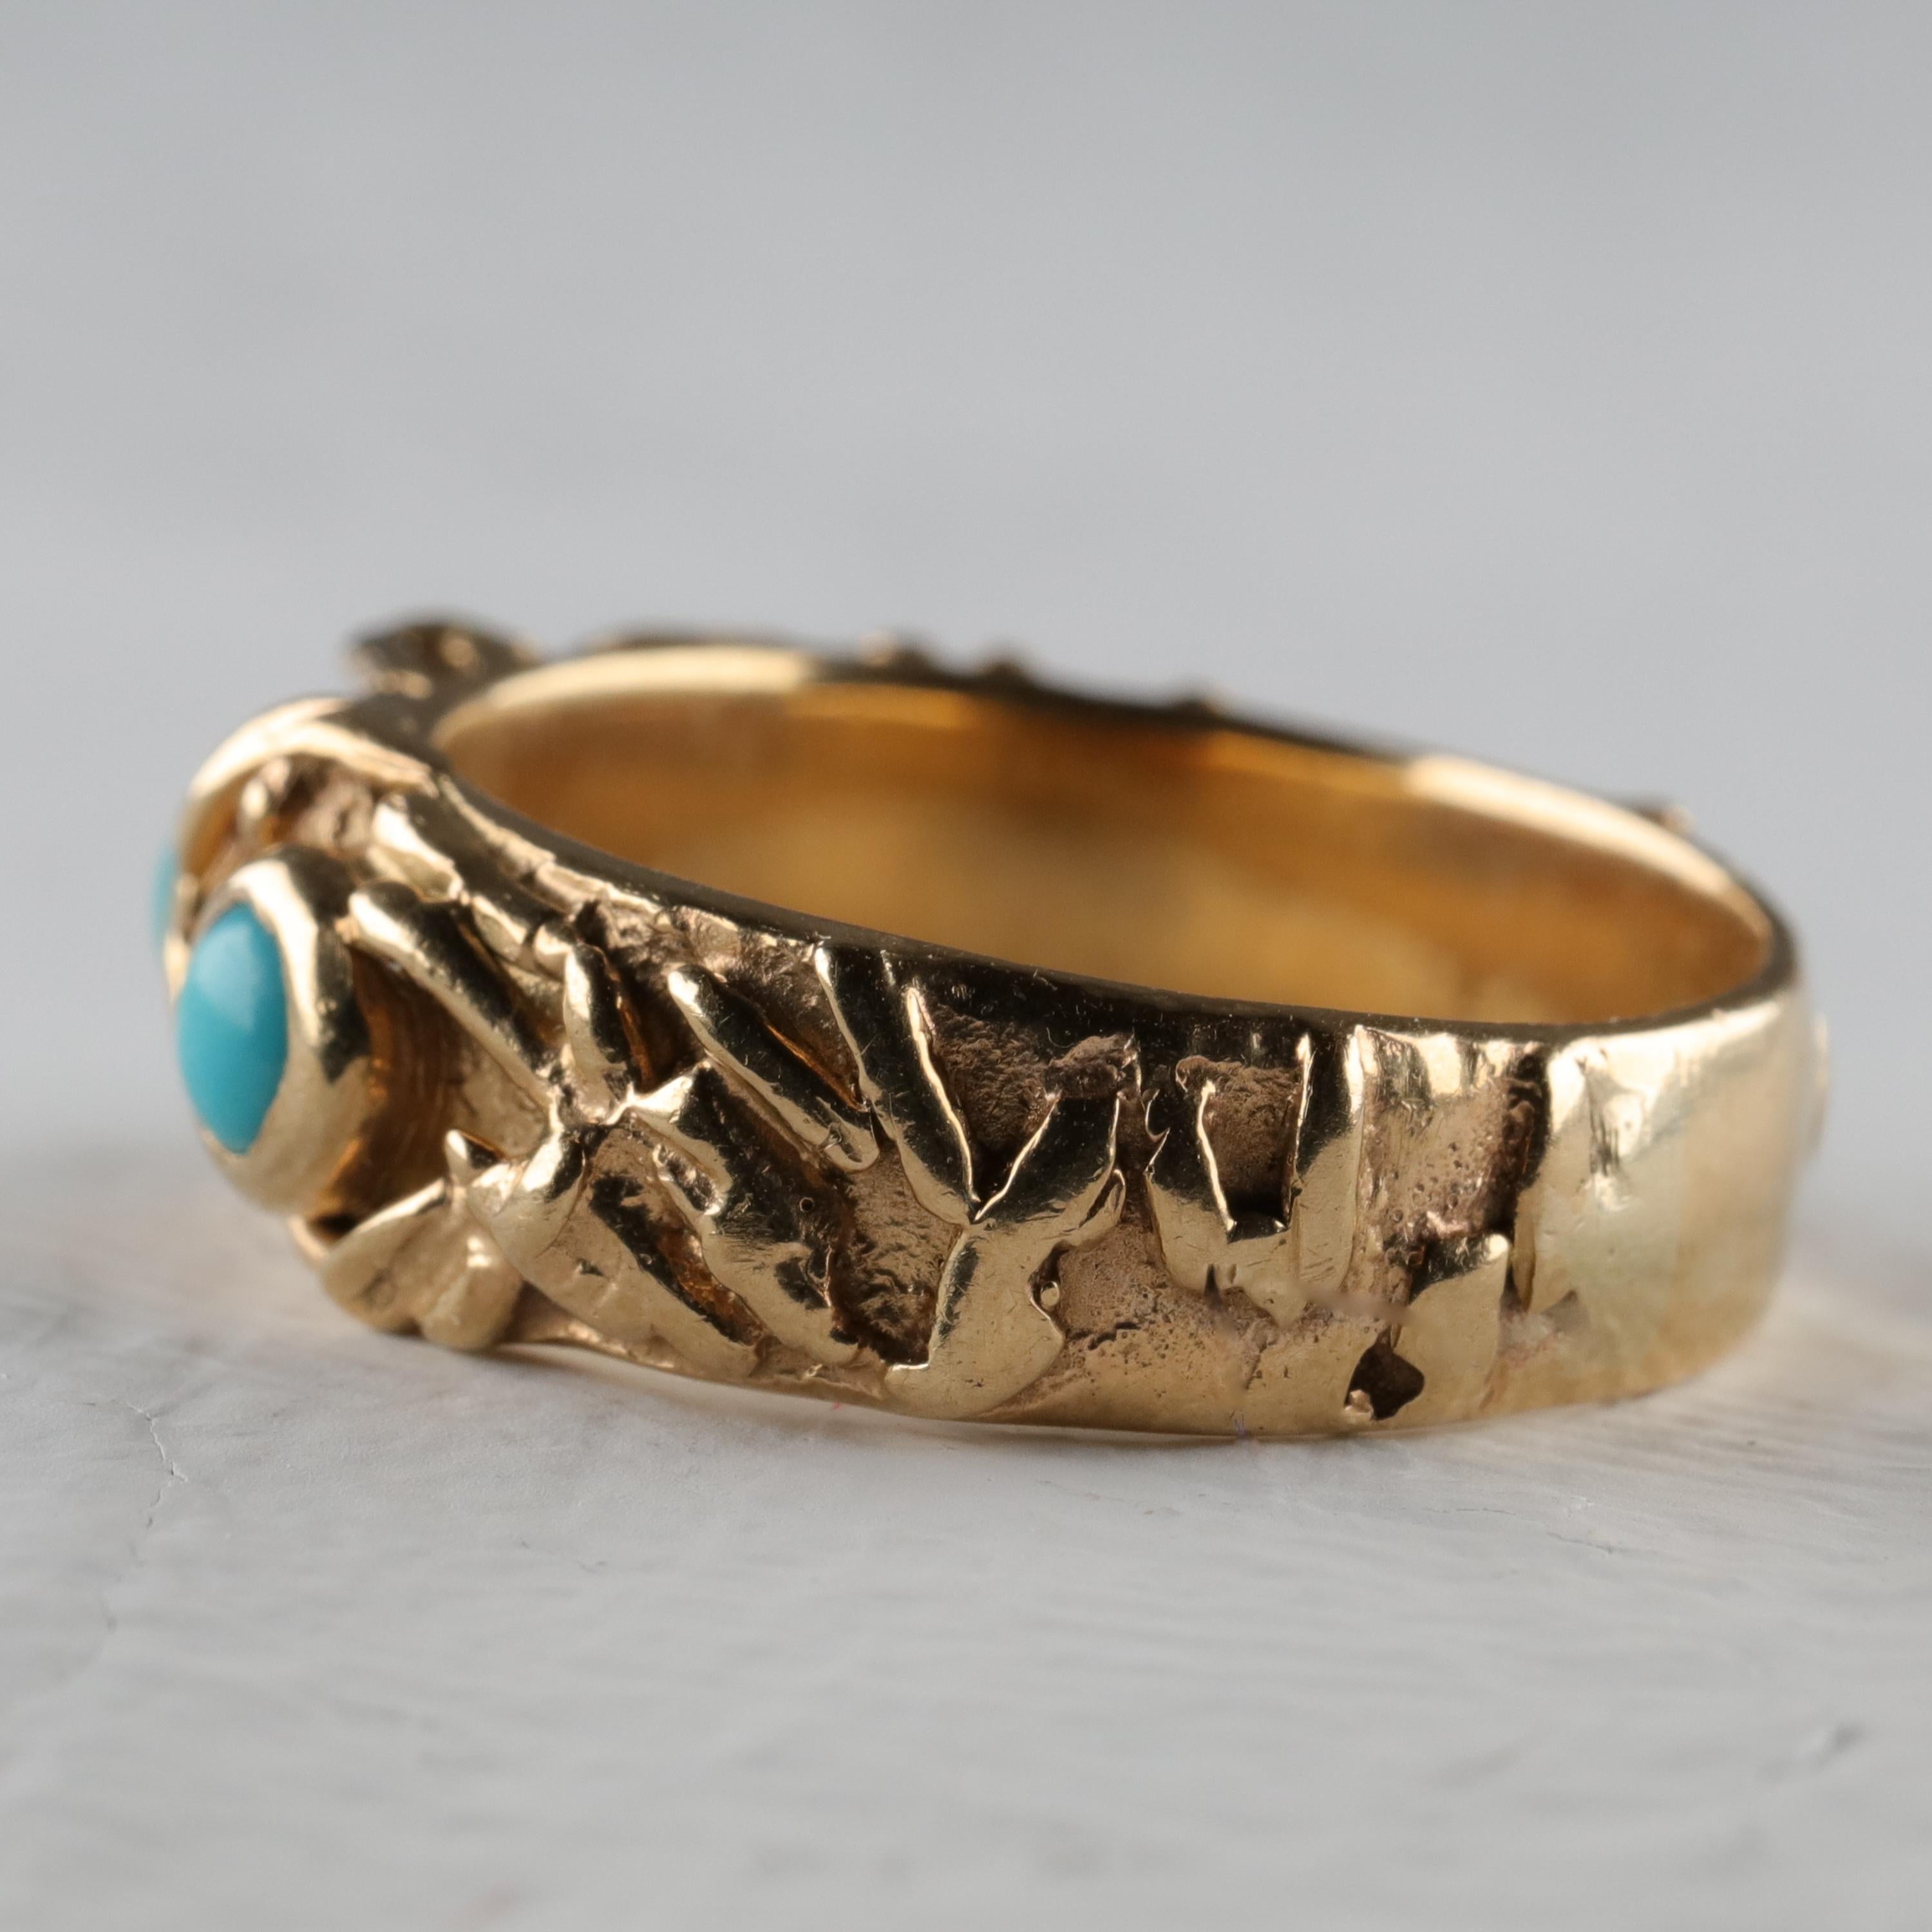 Women's or Men's Gold Band with Persian Turquoise